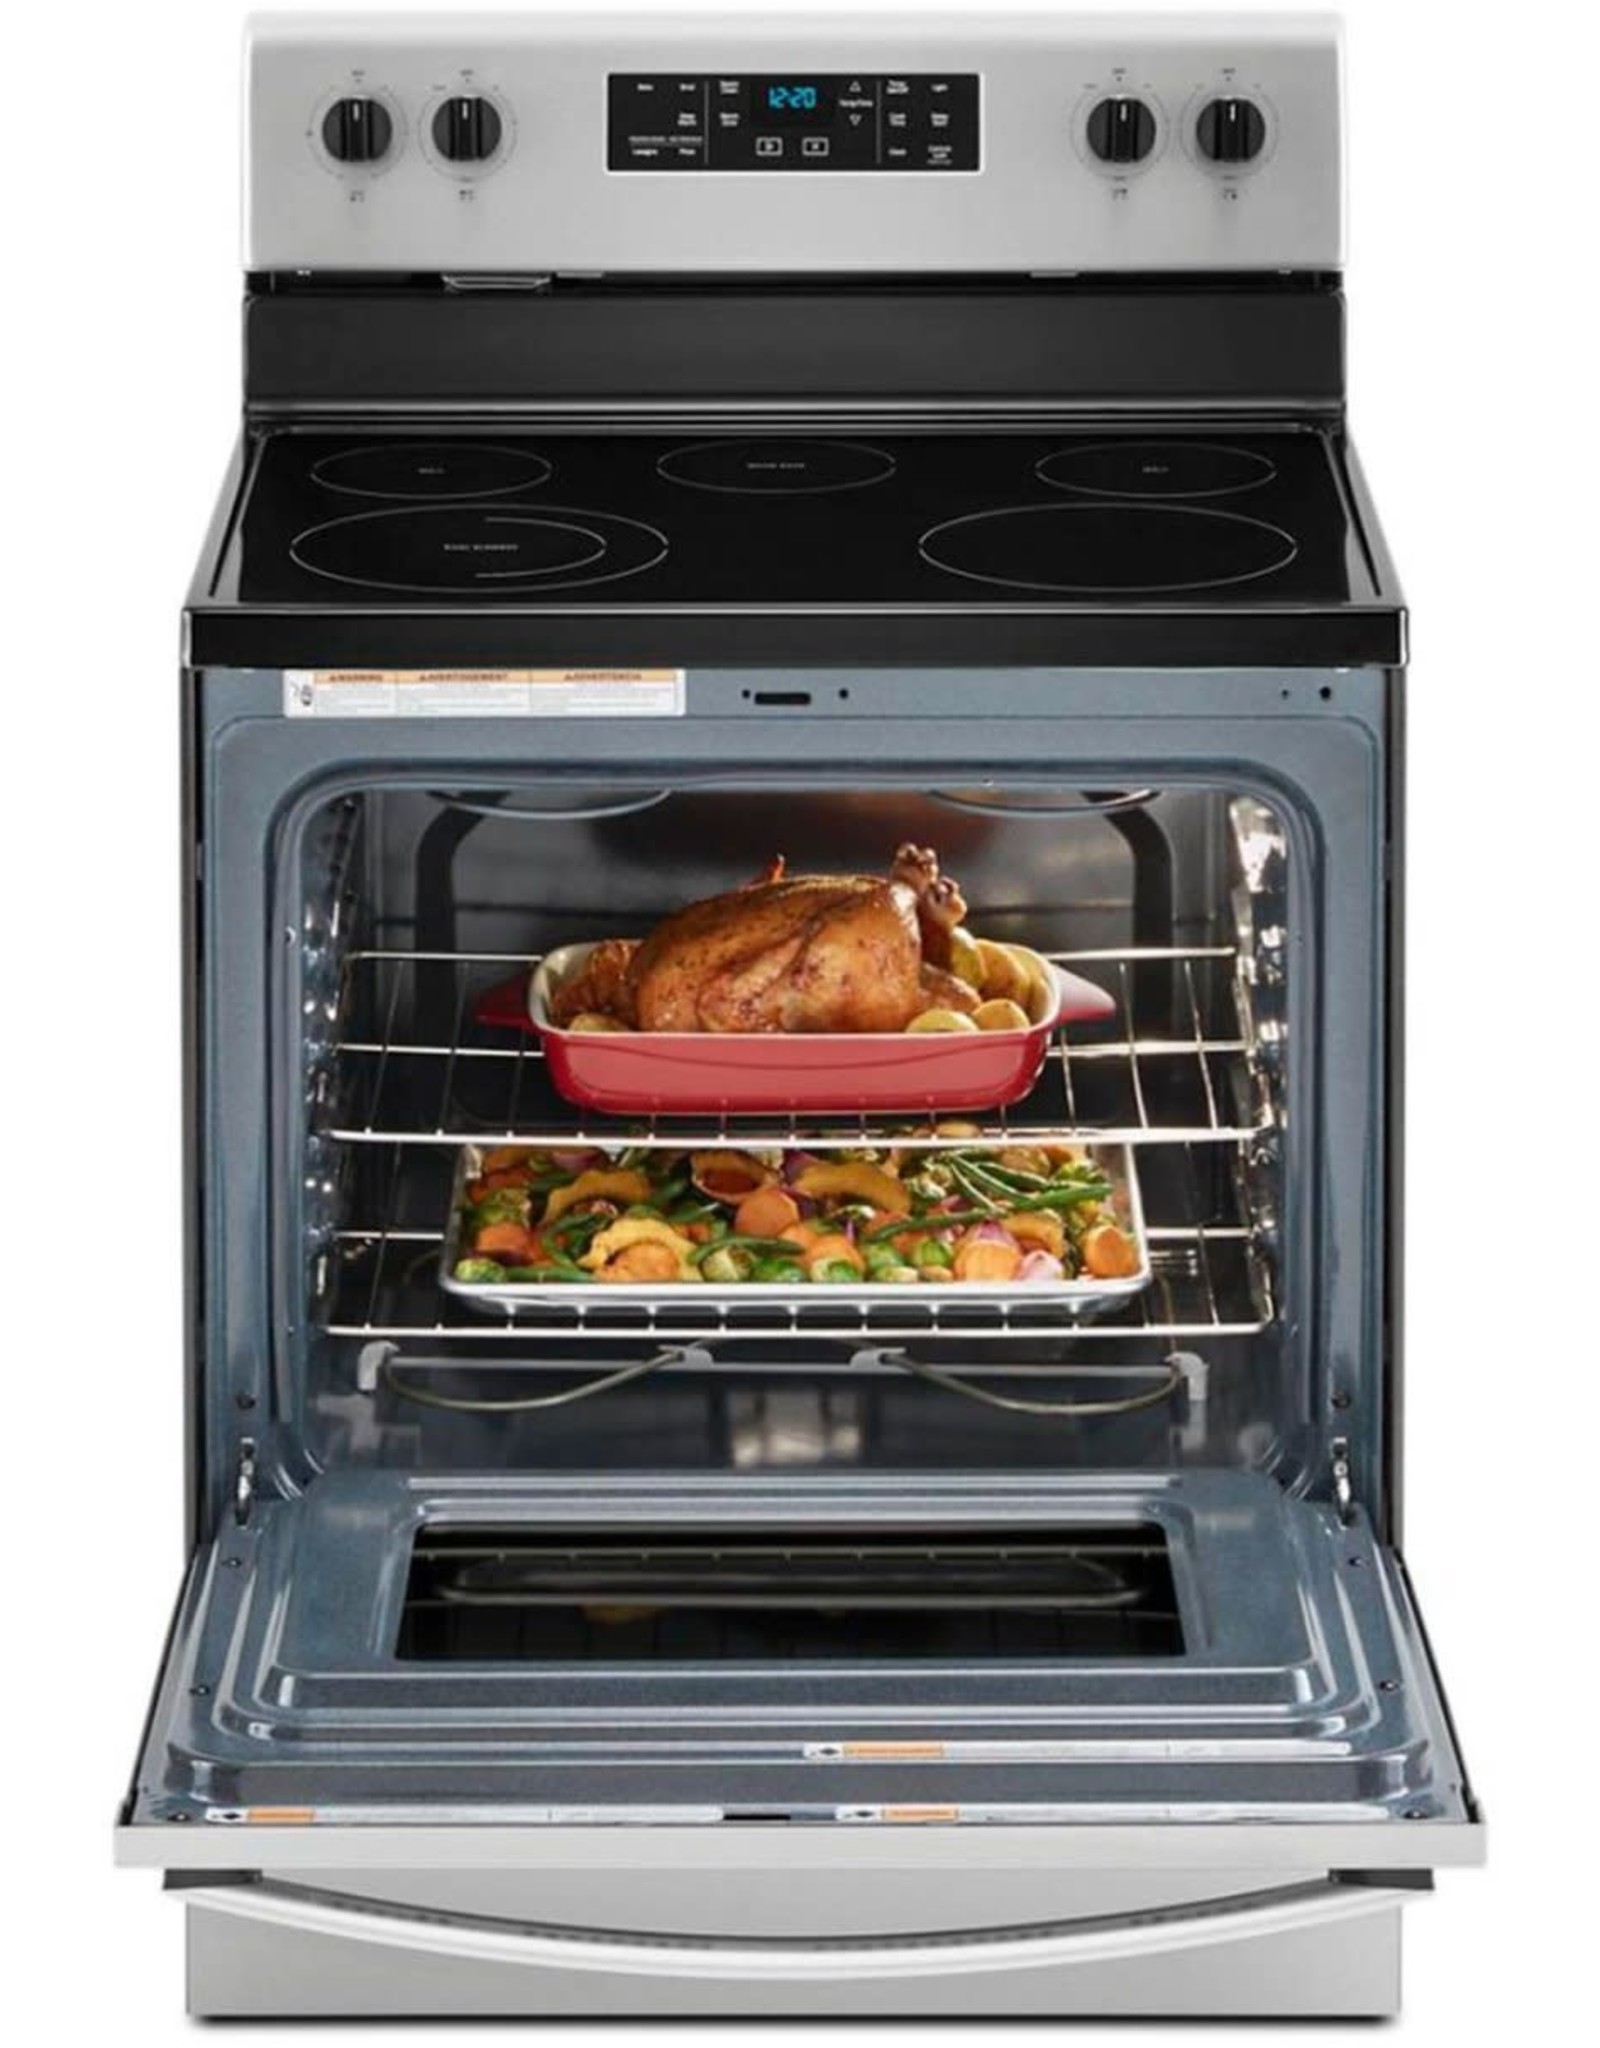 Ck. Whirlpool  30 in. 5.3 cu. ft. Electric Range with 5-Elements and Frozen Bake Technology in Fingerprint Resistant Stainless Steel